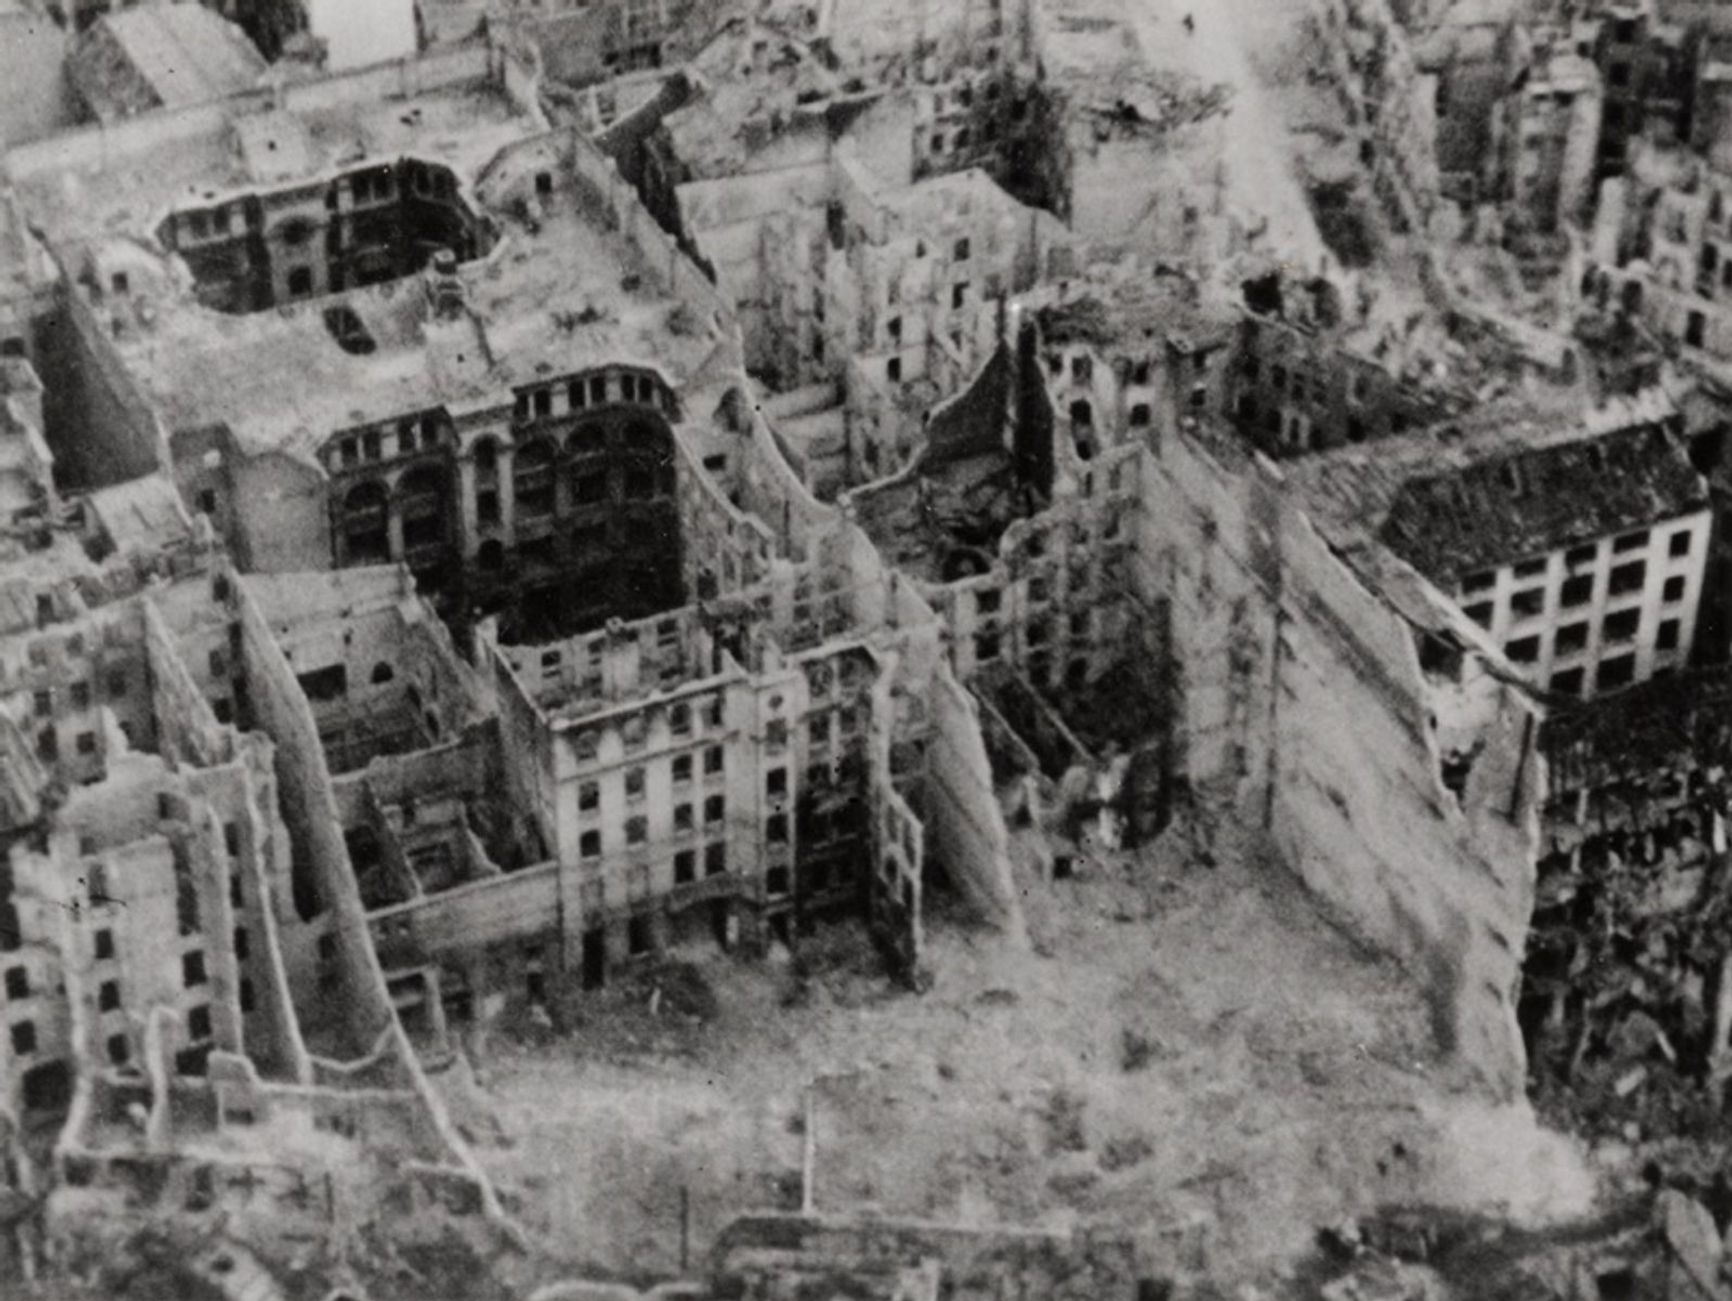 An aerial view of Berlin's ruins, 1945